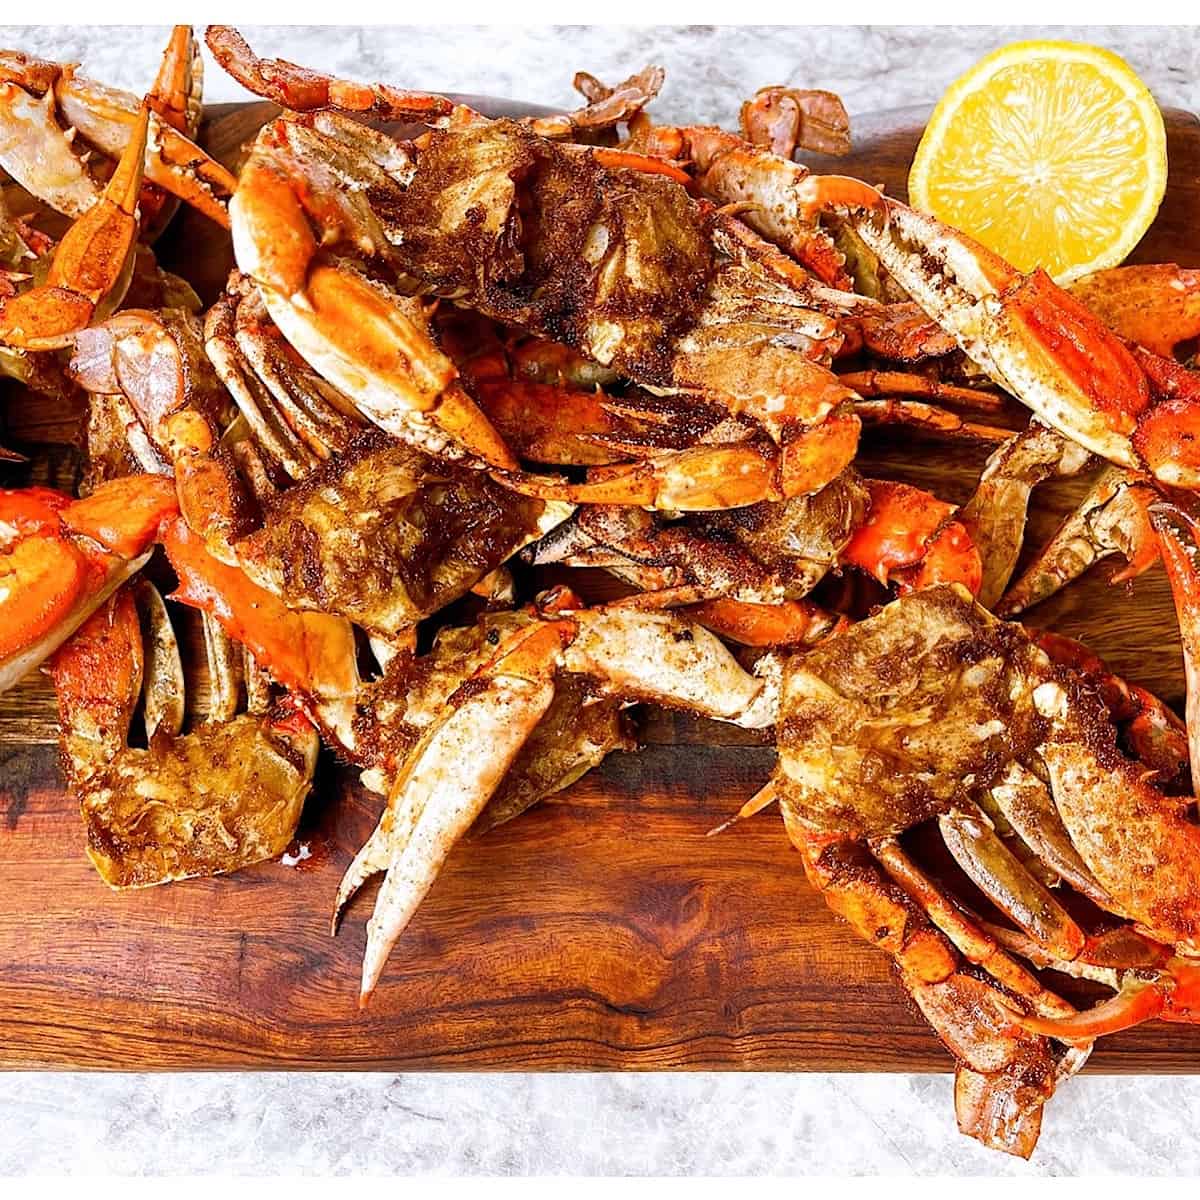 Platter of barbecued crabs on wooden cutting board with lemon